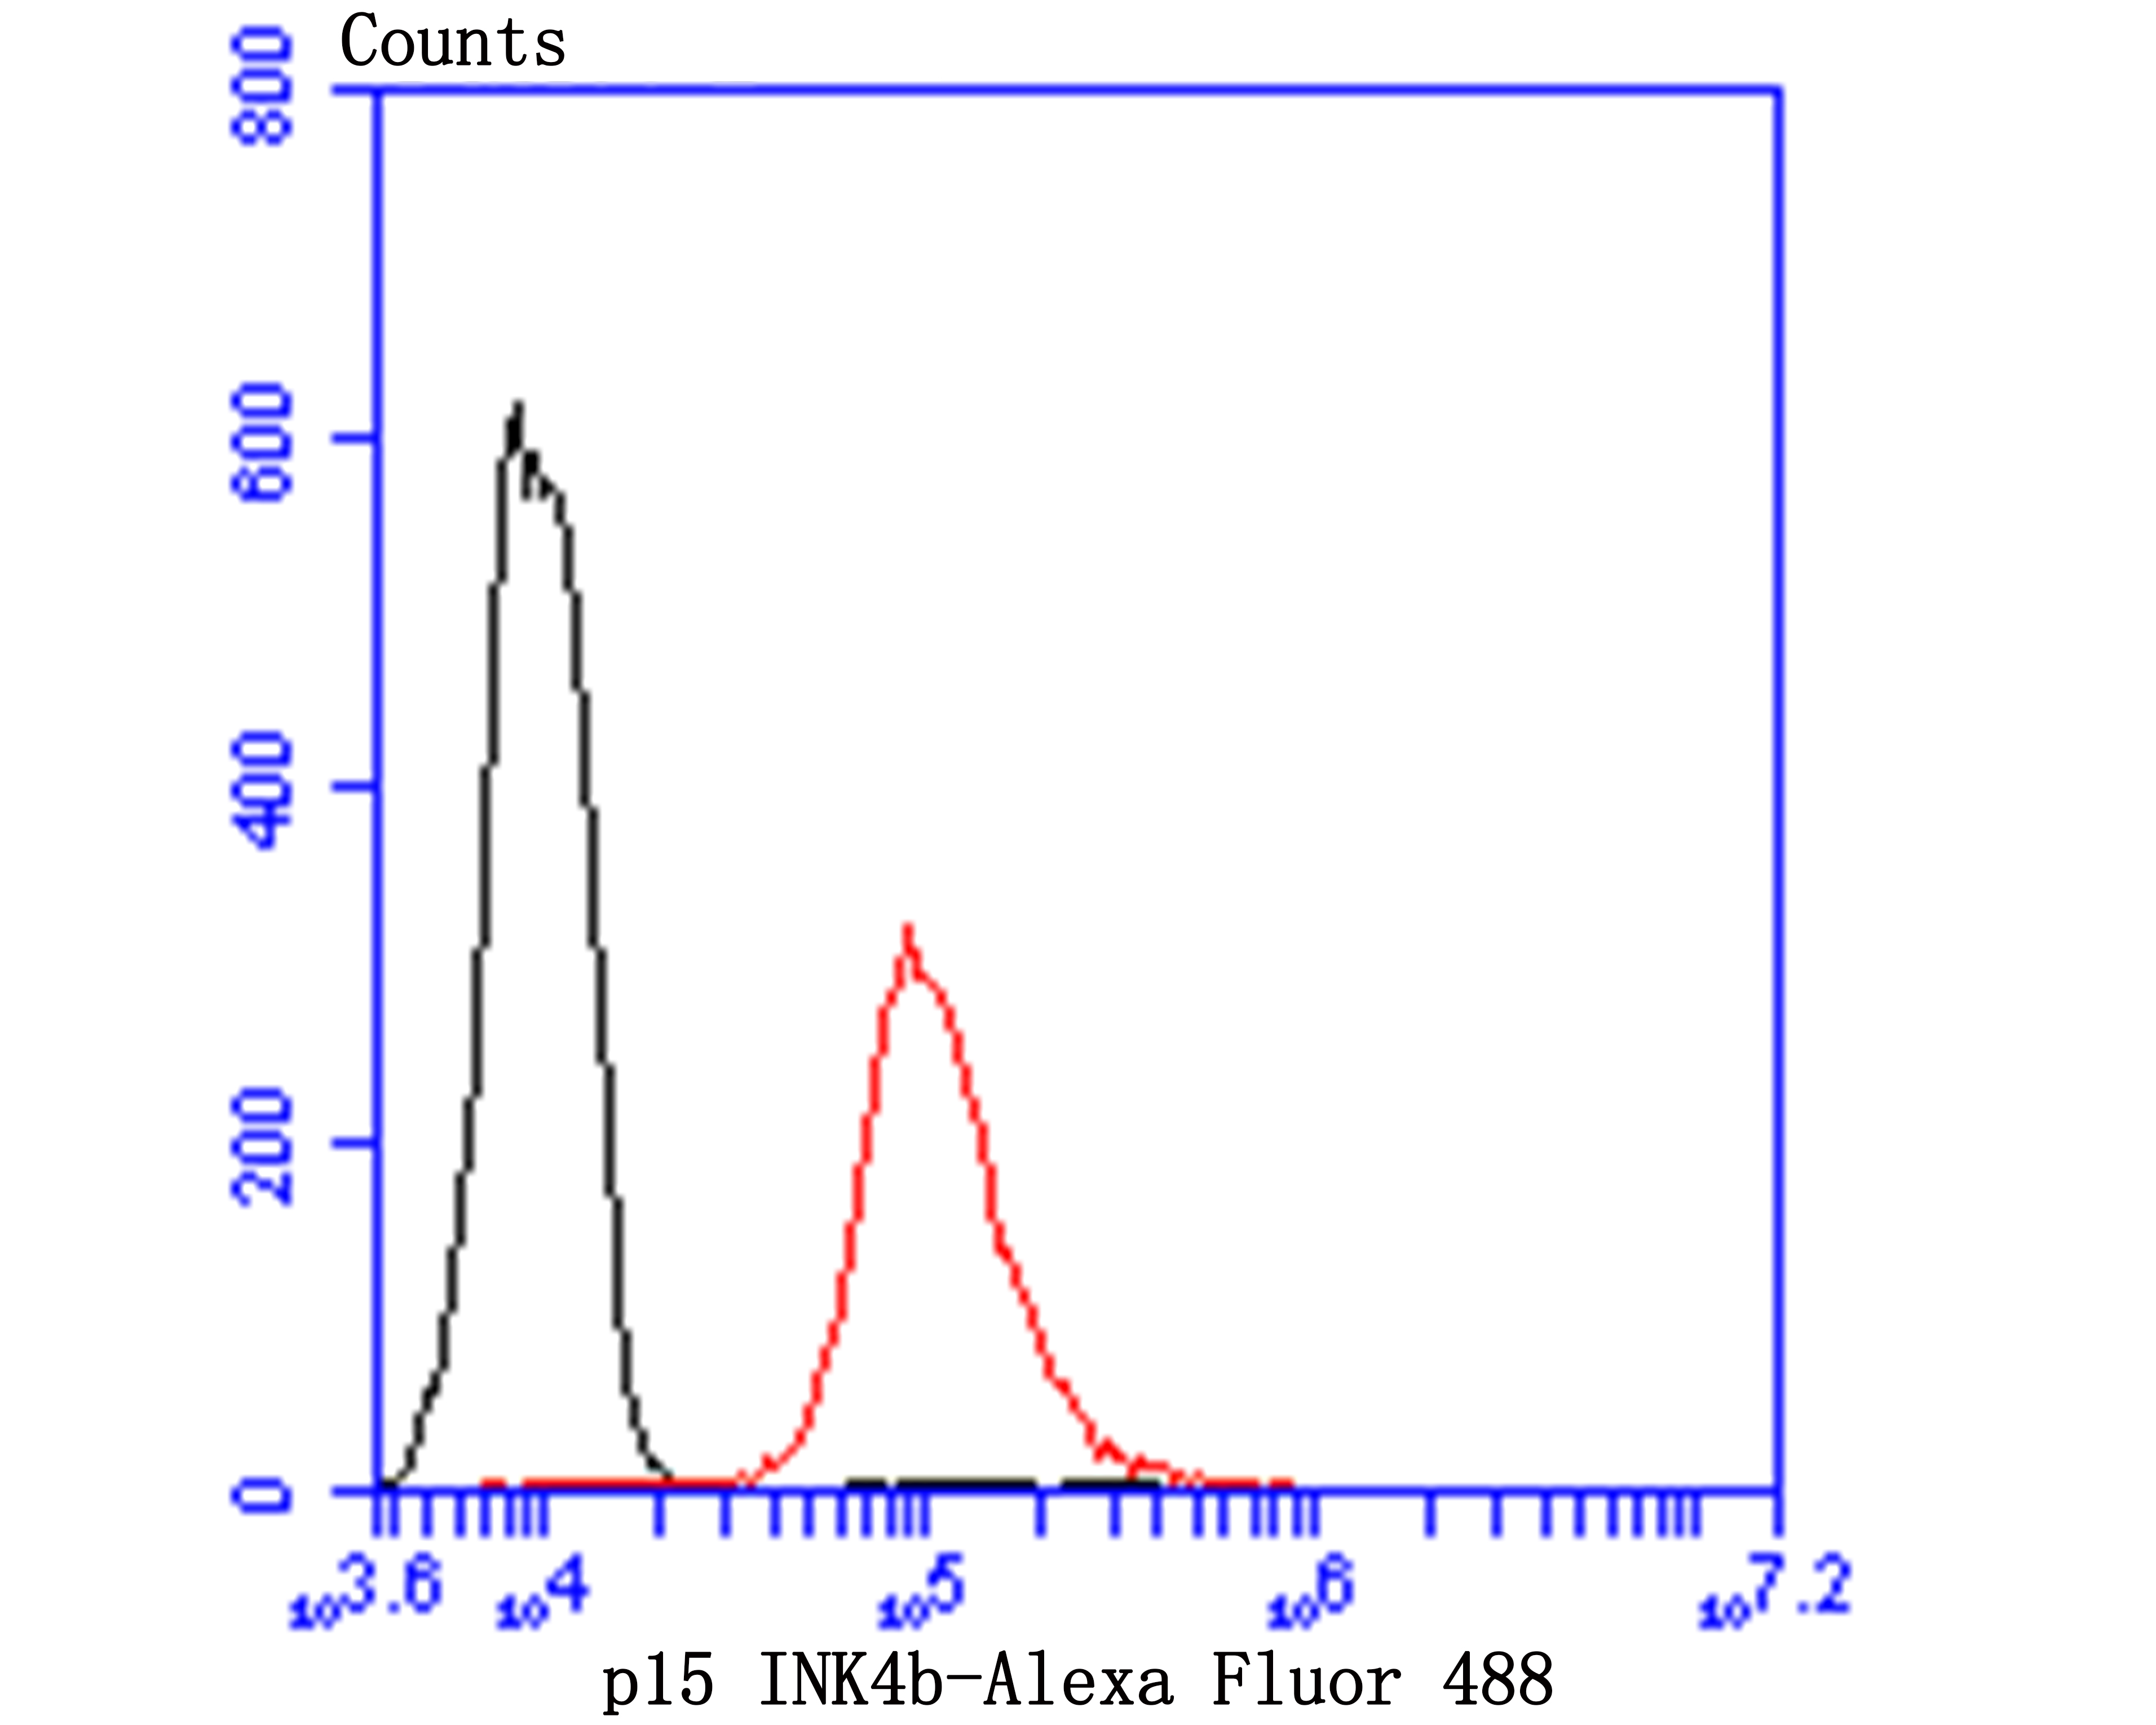 Flow cytometric analysis of p15 INK4b was done on Hela cells. The cells were fixed, permeabilized and stained with p15 INK4b antibody at 1/100 dilution (red) compared with an unlabelled control (cells without incubation with primary antibody; black). After incubation of the primary antibody on room temperature for an hour, the cells was stained with a Alexa Fluor™ 488-conjugated goat anti-Rabbit IgG Secondary antibody at 1/500 dilution for 30 minutes.